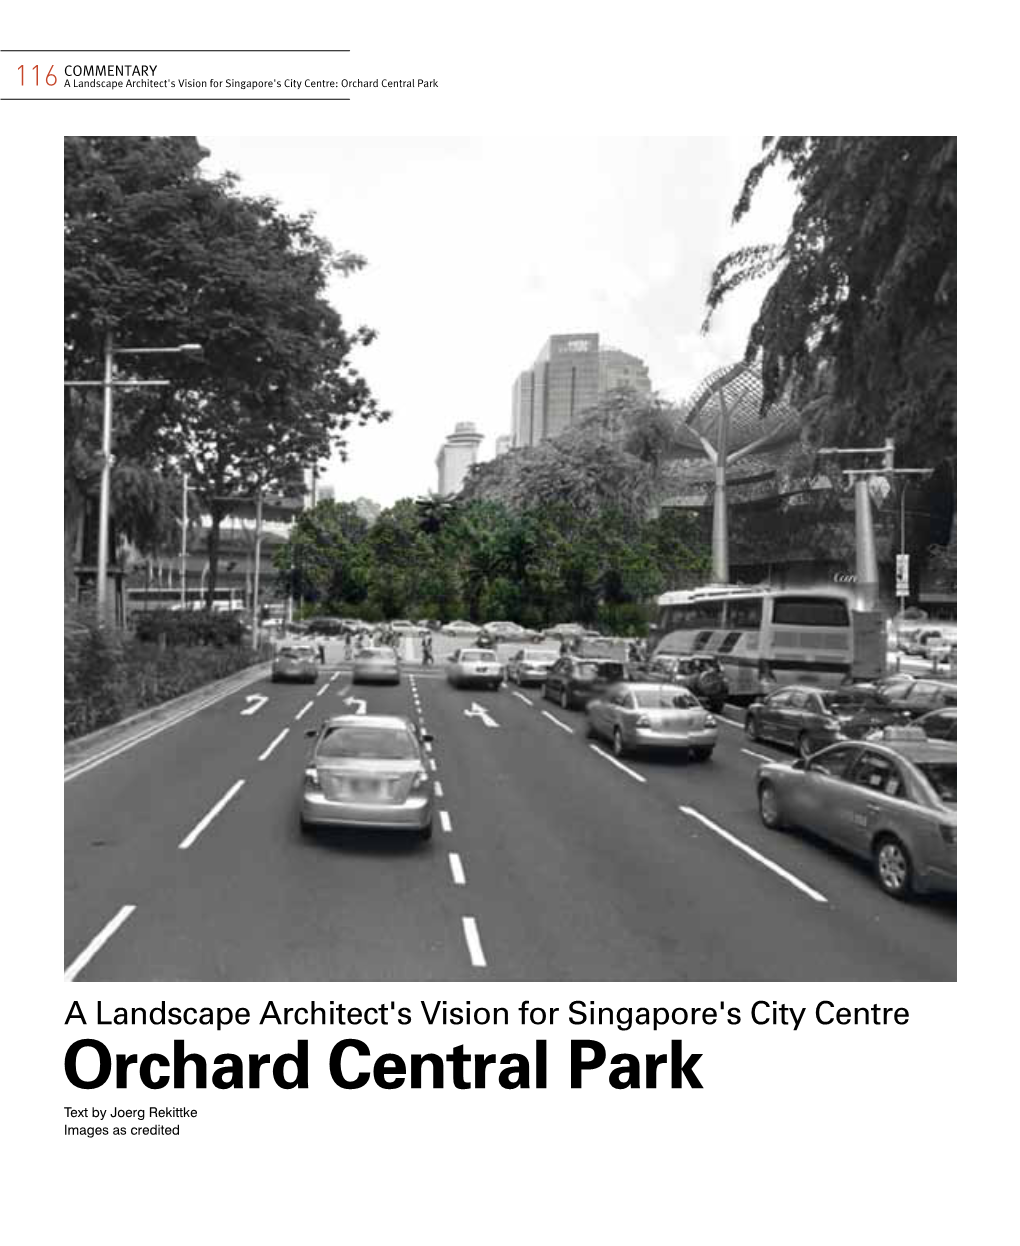 Orchard Central Park